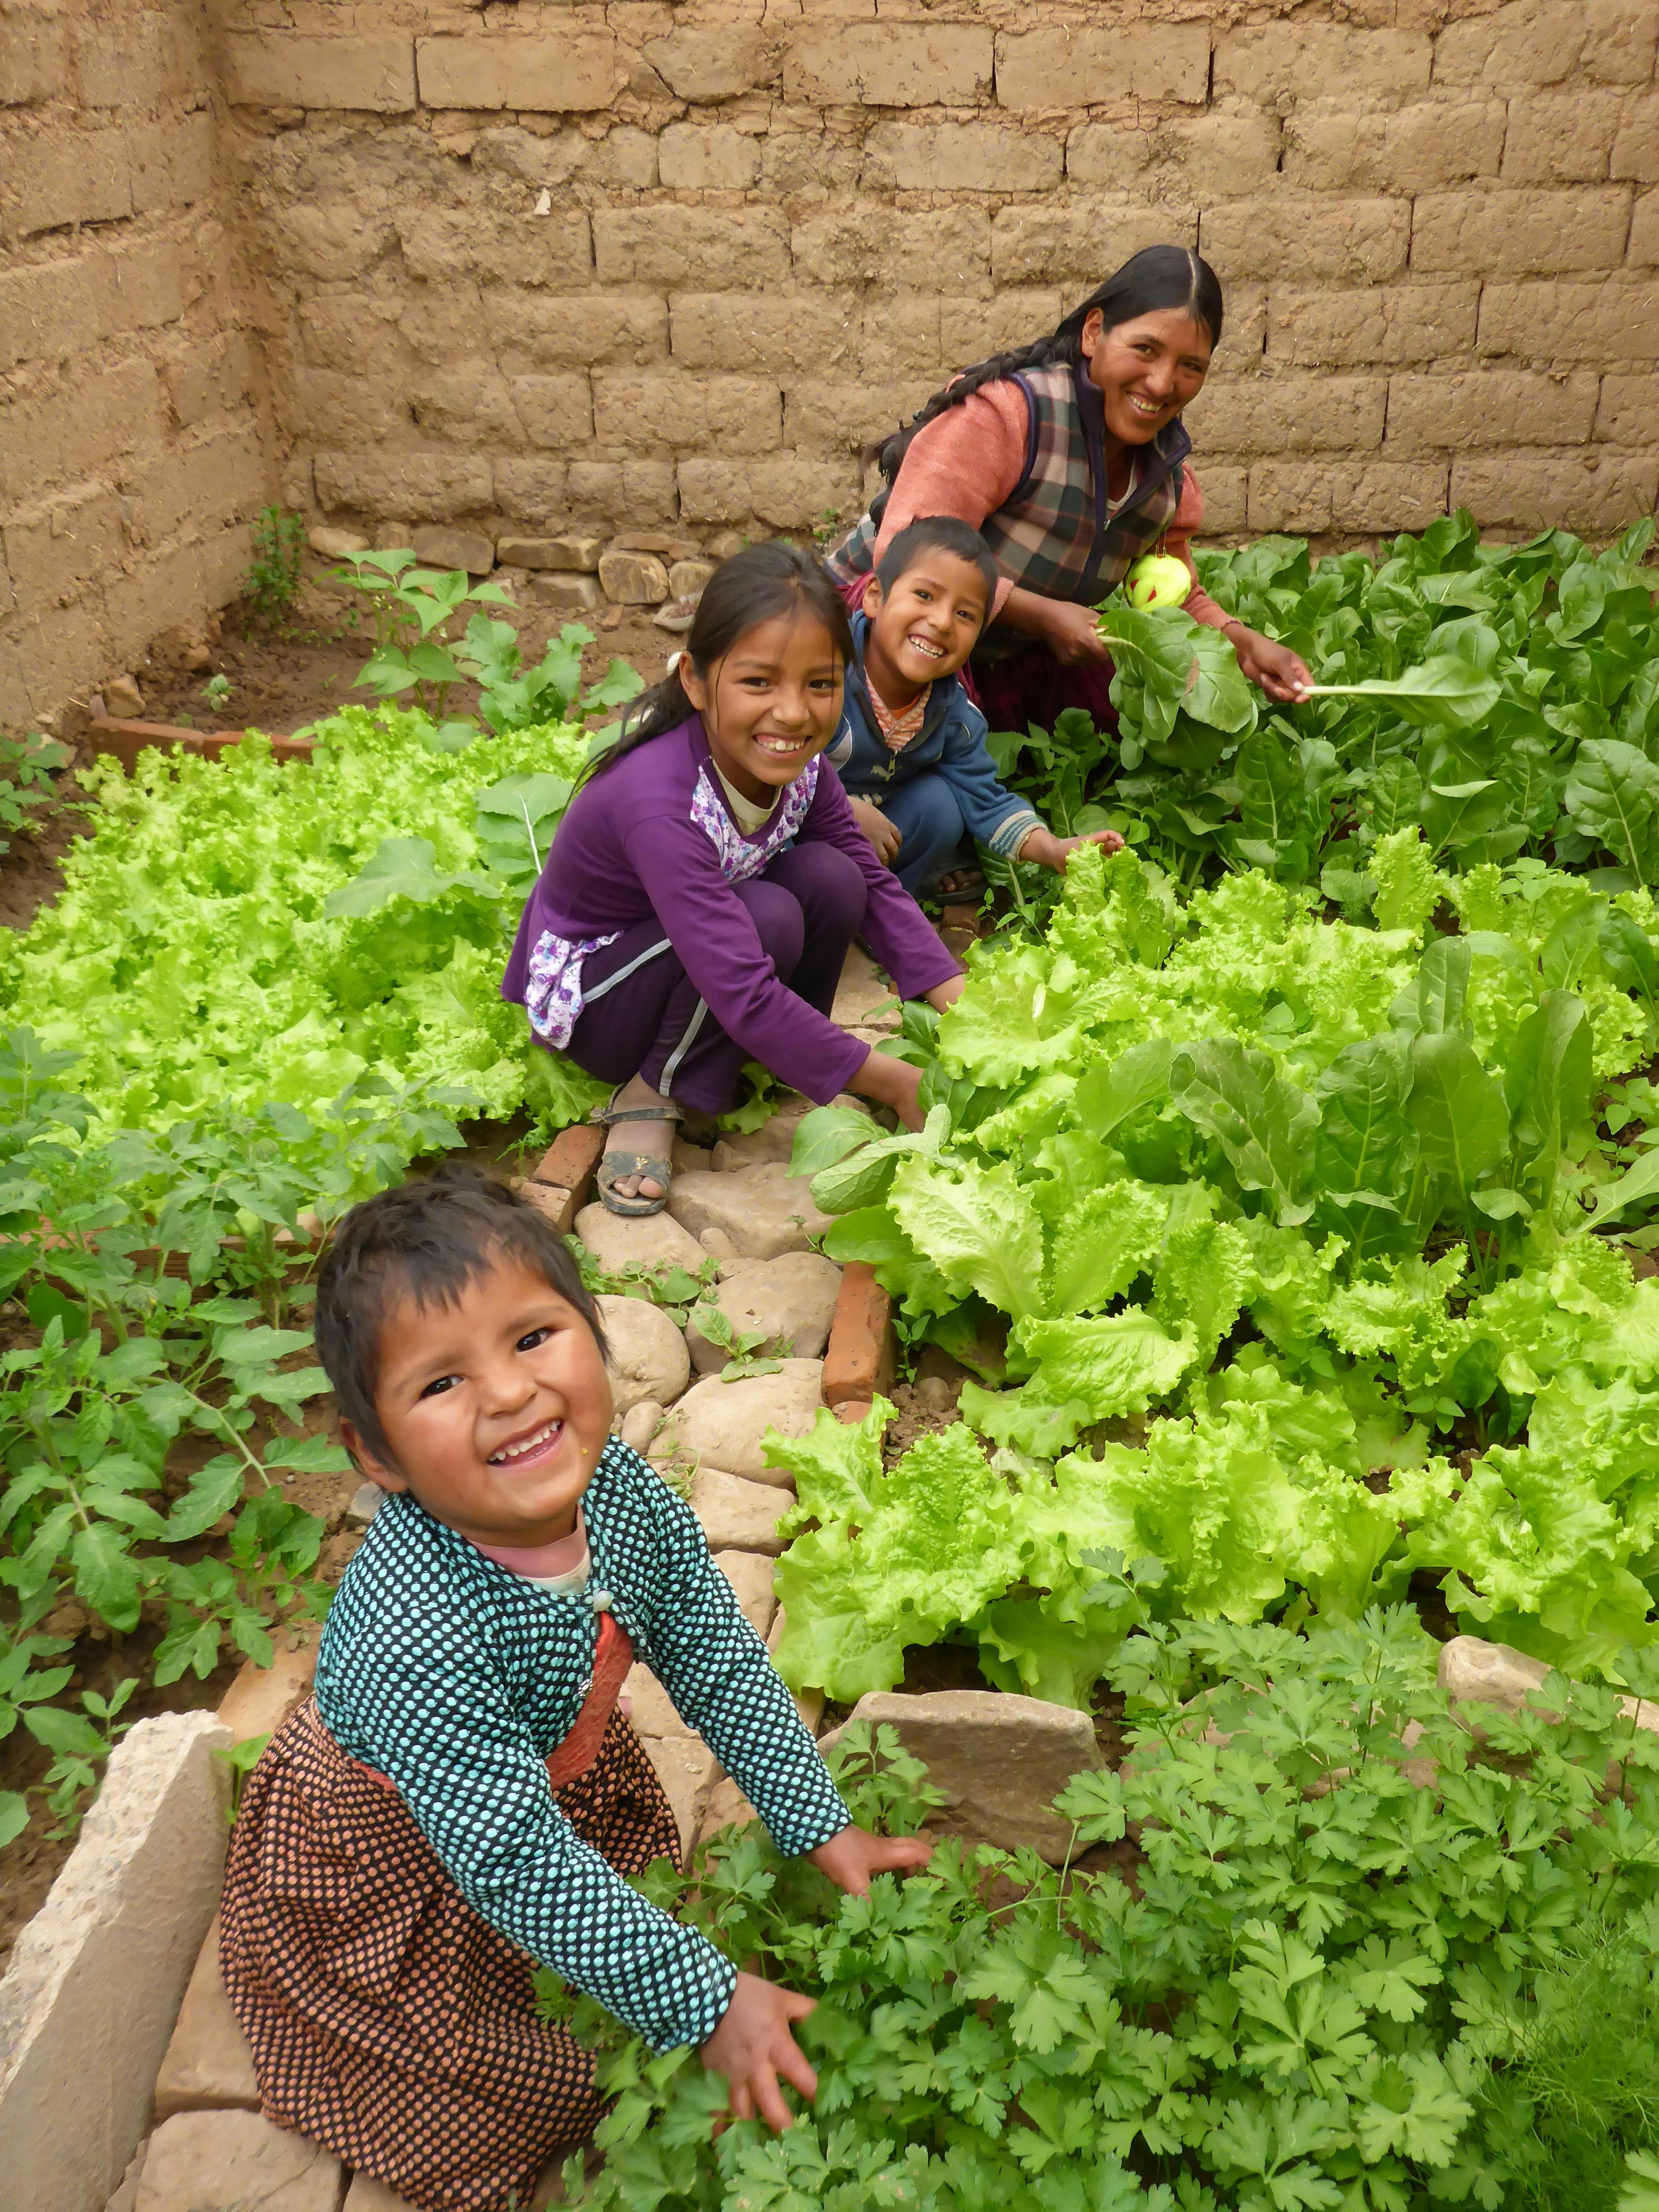 International Womens Day Photoessay - Mom and three children in Bolivia working in their greenhouse smiling by their lush agricultural produce like cabbage and lettuce